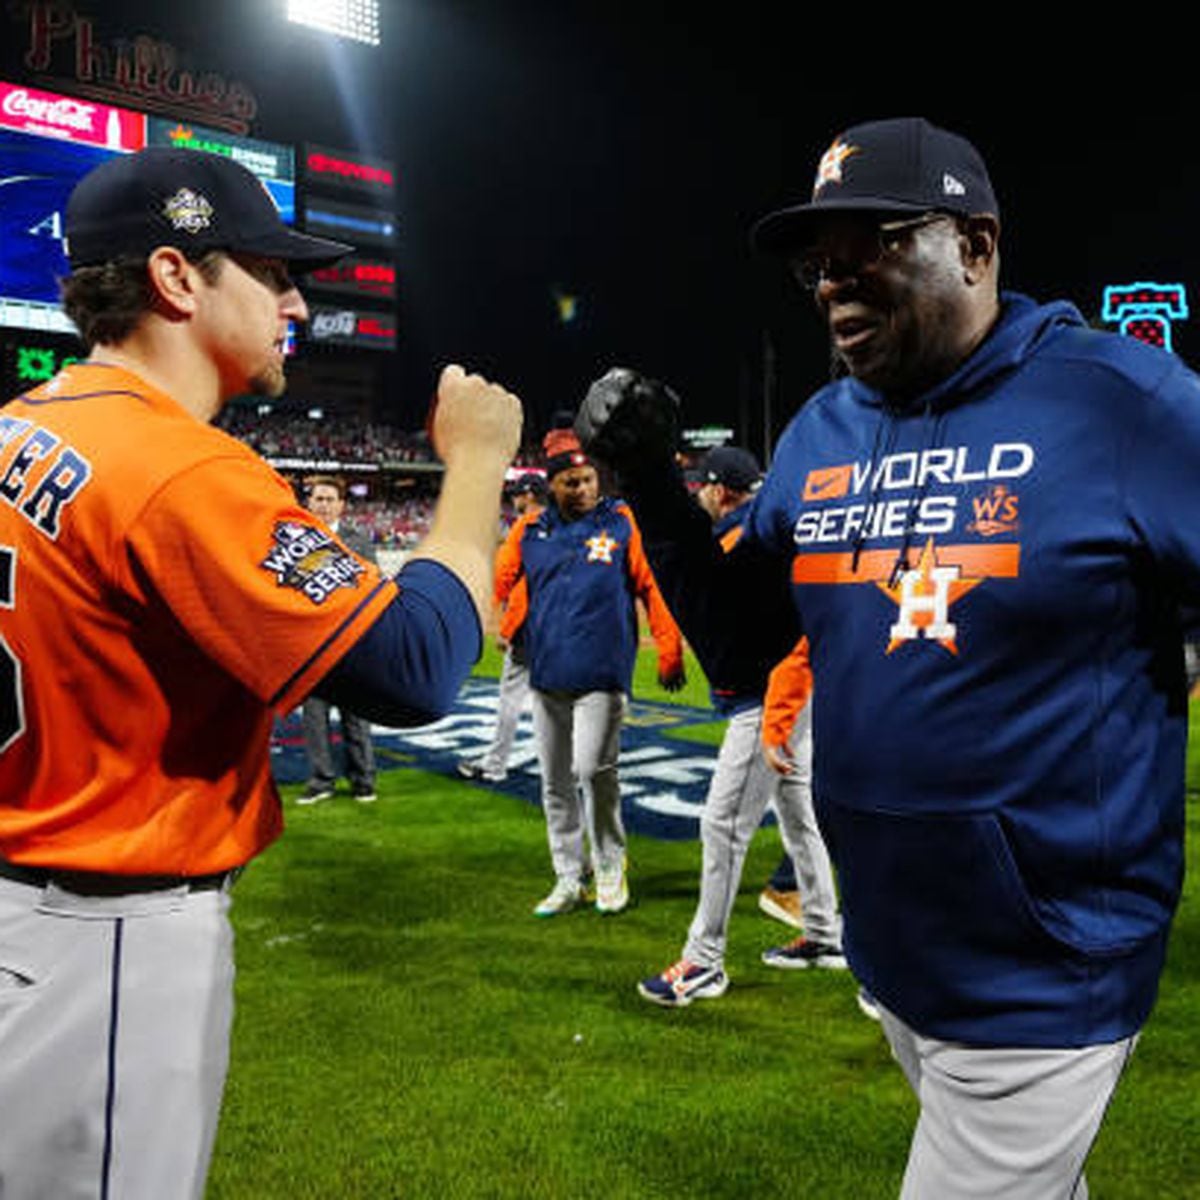 Has Dusty Baker won a World Series as a manager?